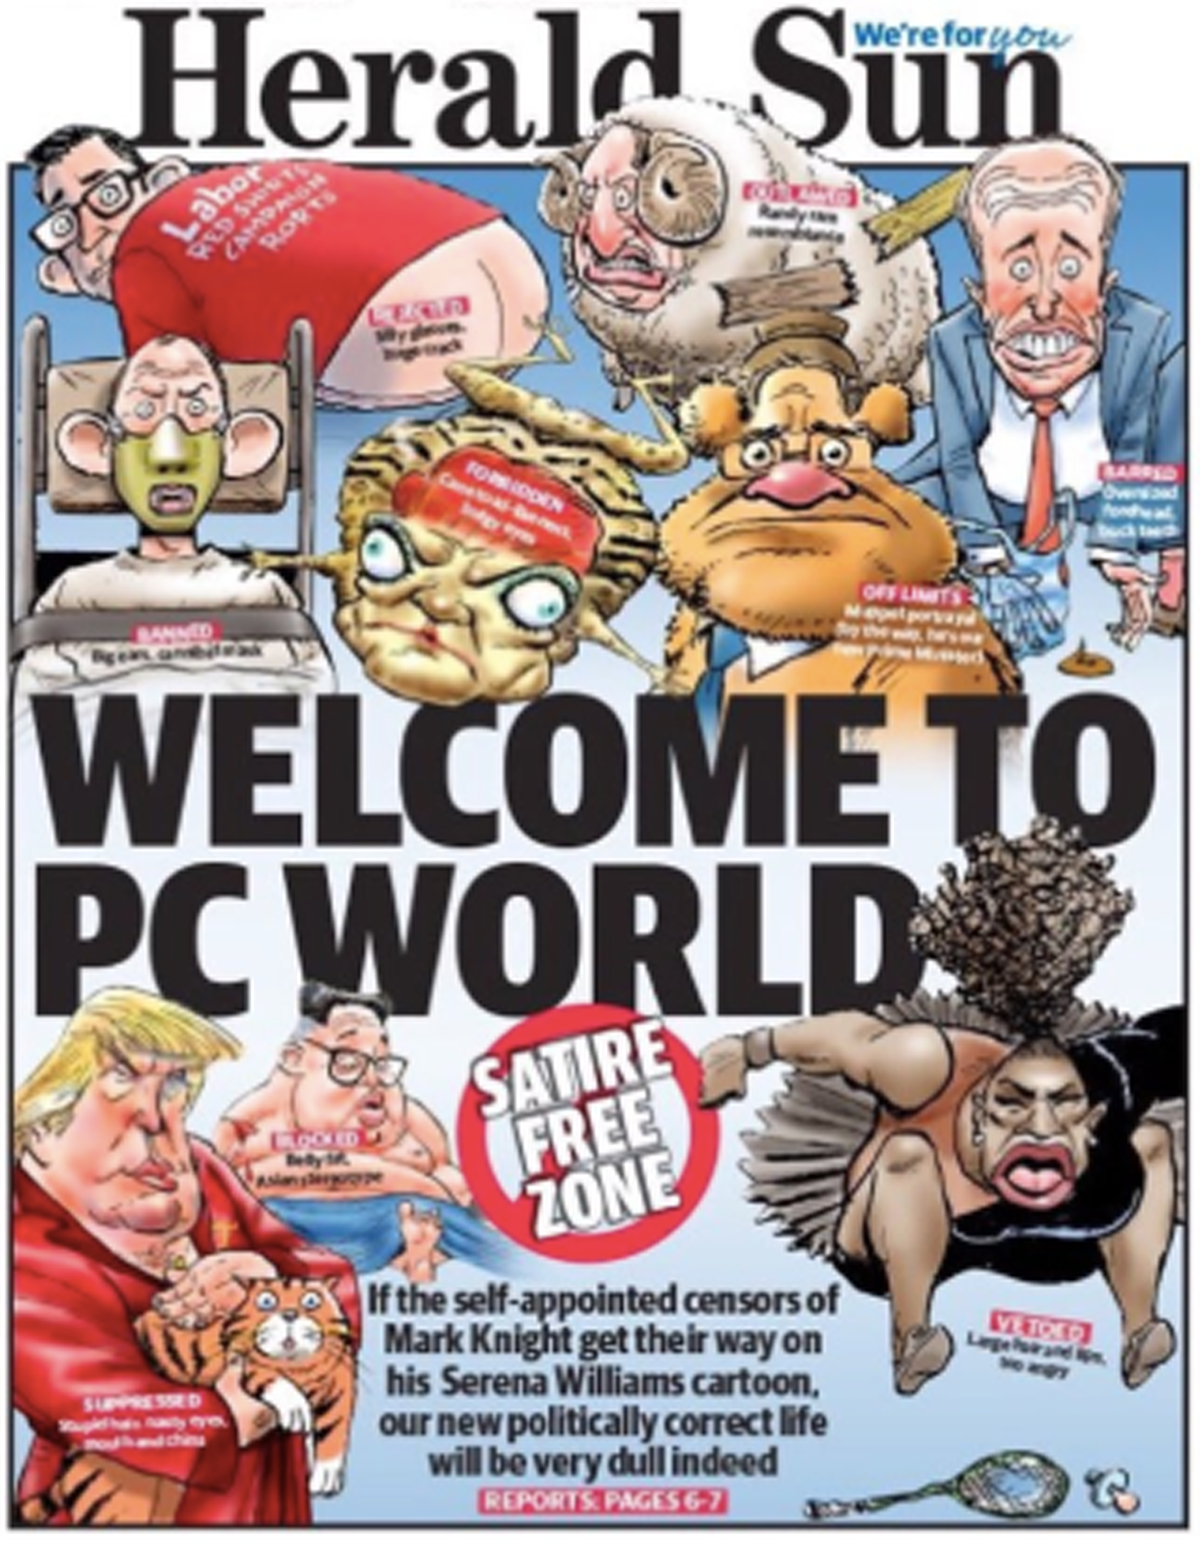 Paper defends Serena Williams cartoon with 'Welcome to PC world' front page  